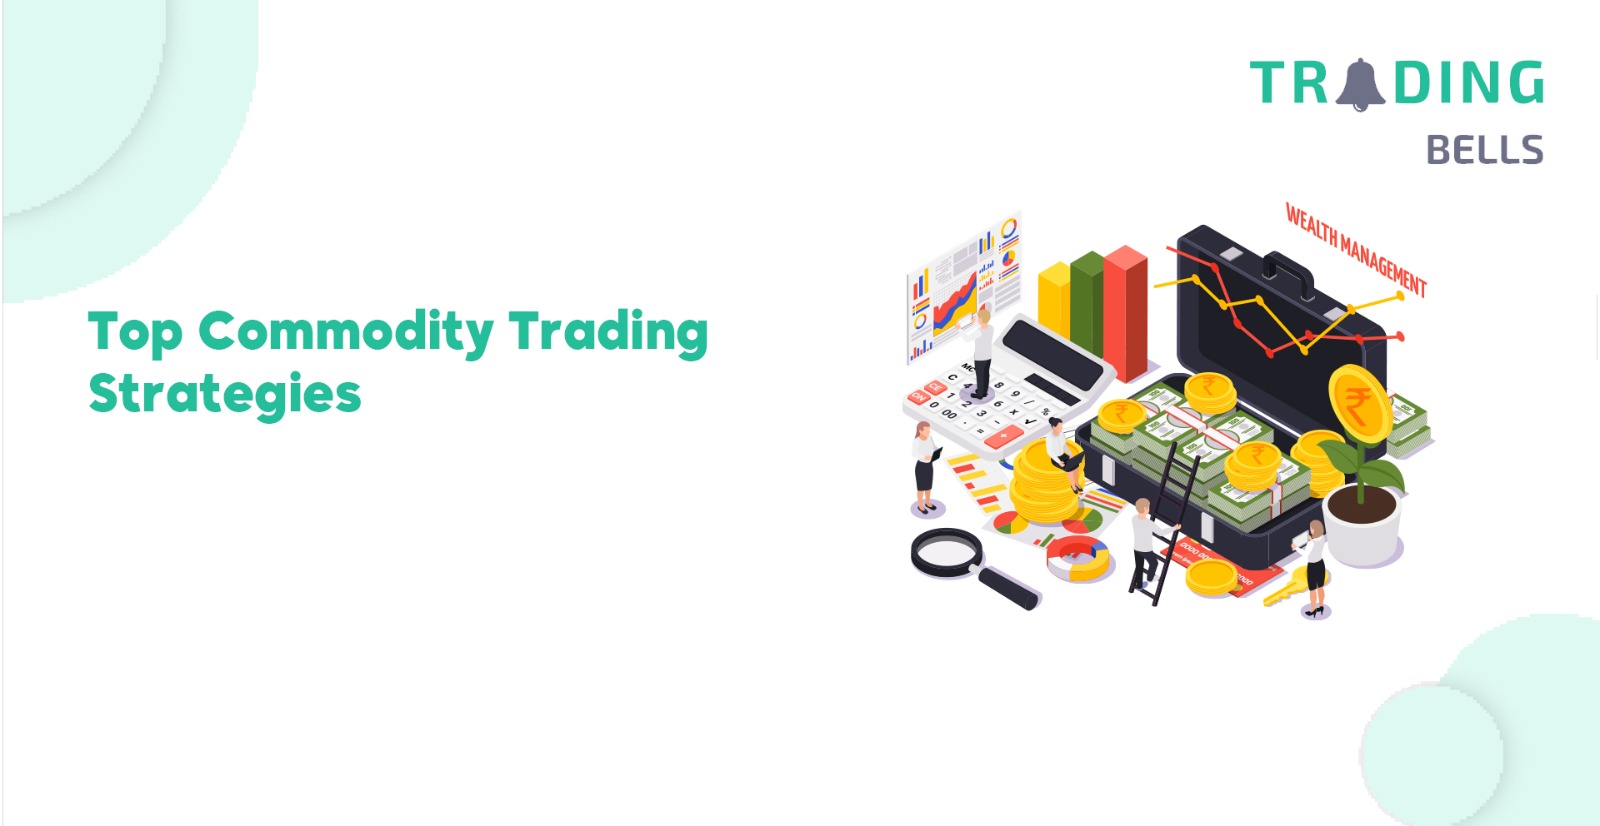 Top Commodity Trading Strategies